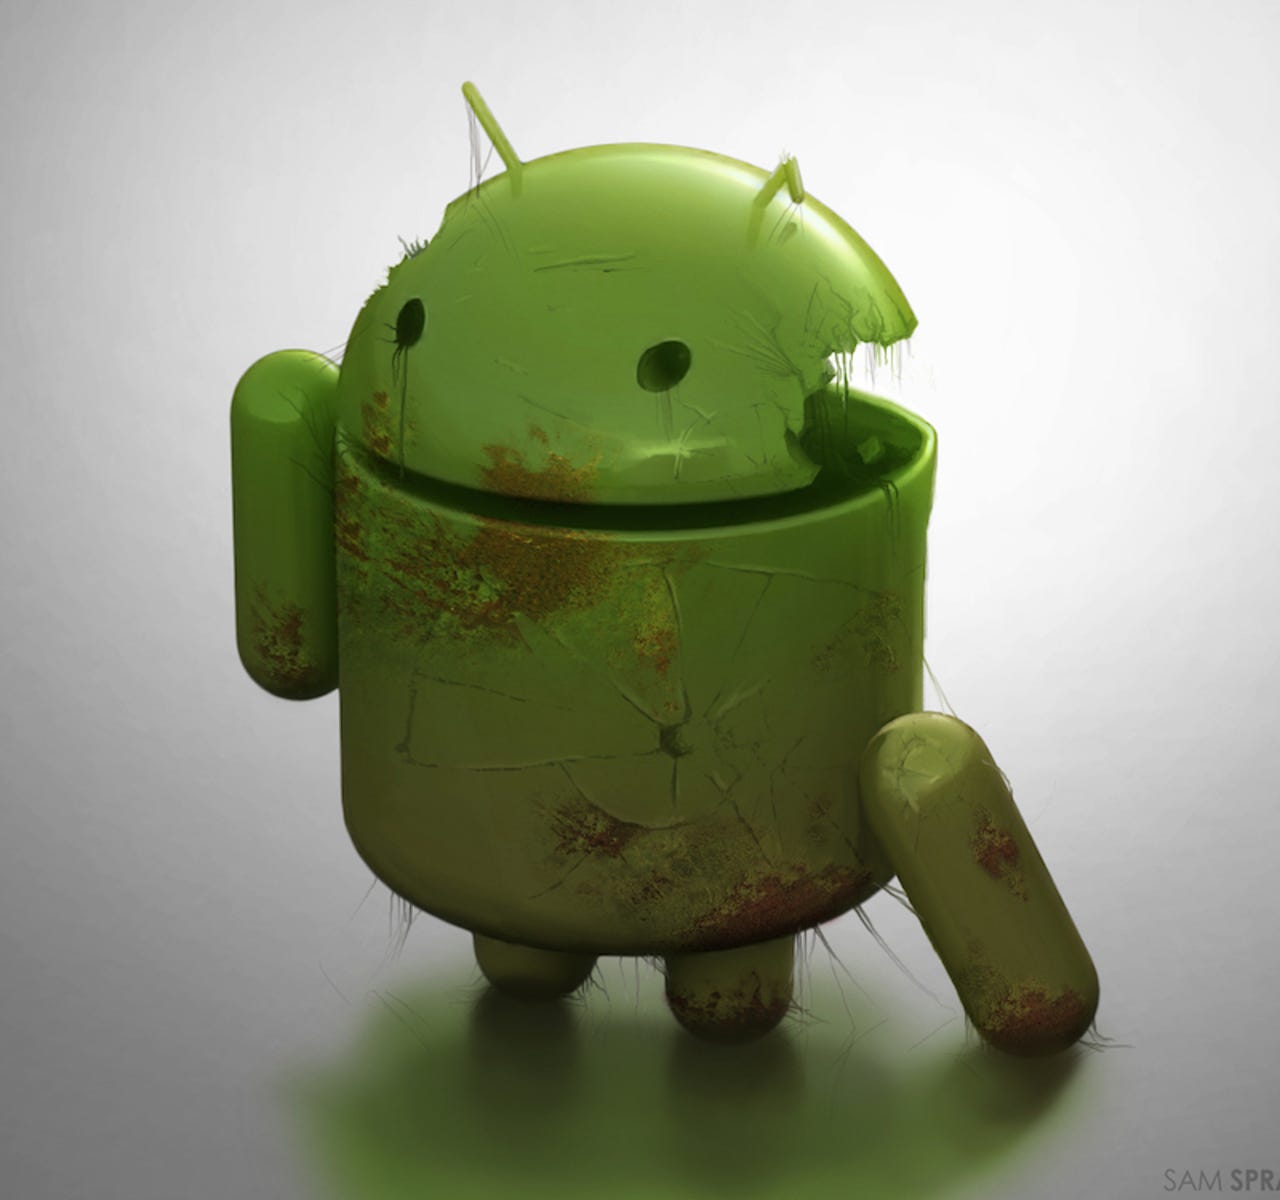 j-11-android.jpg